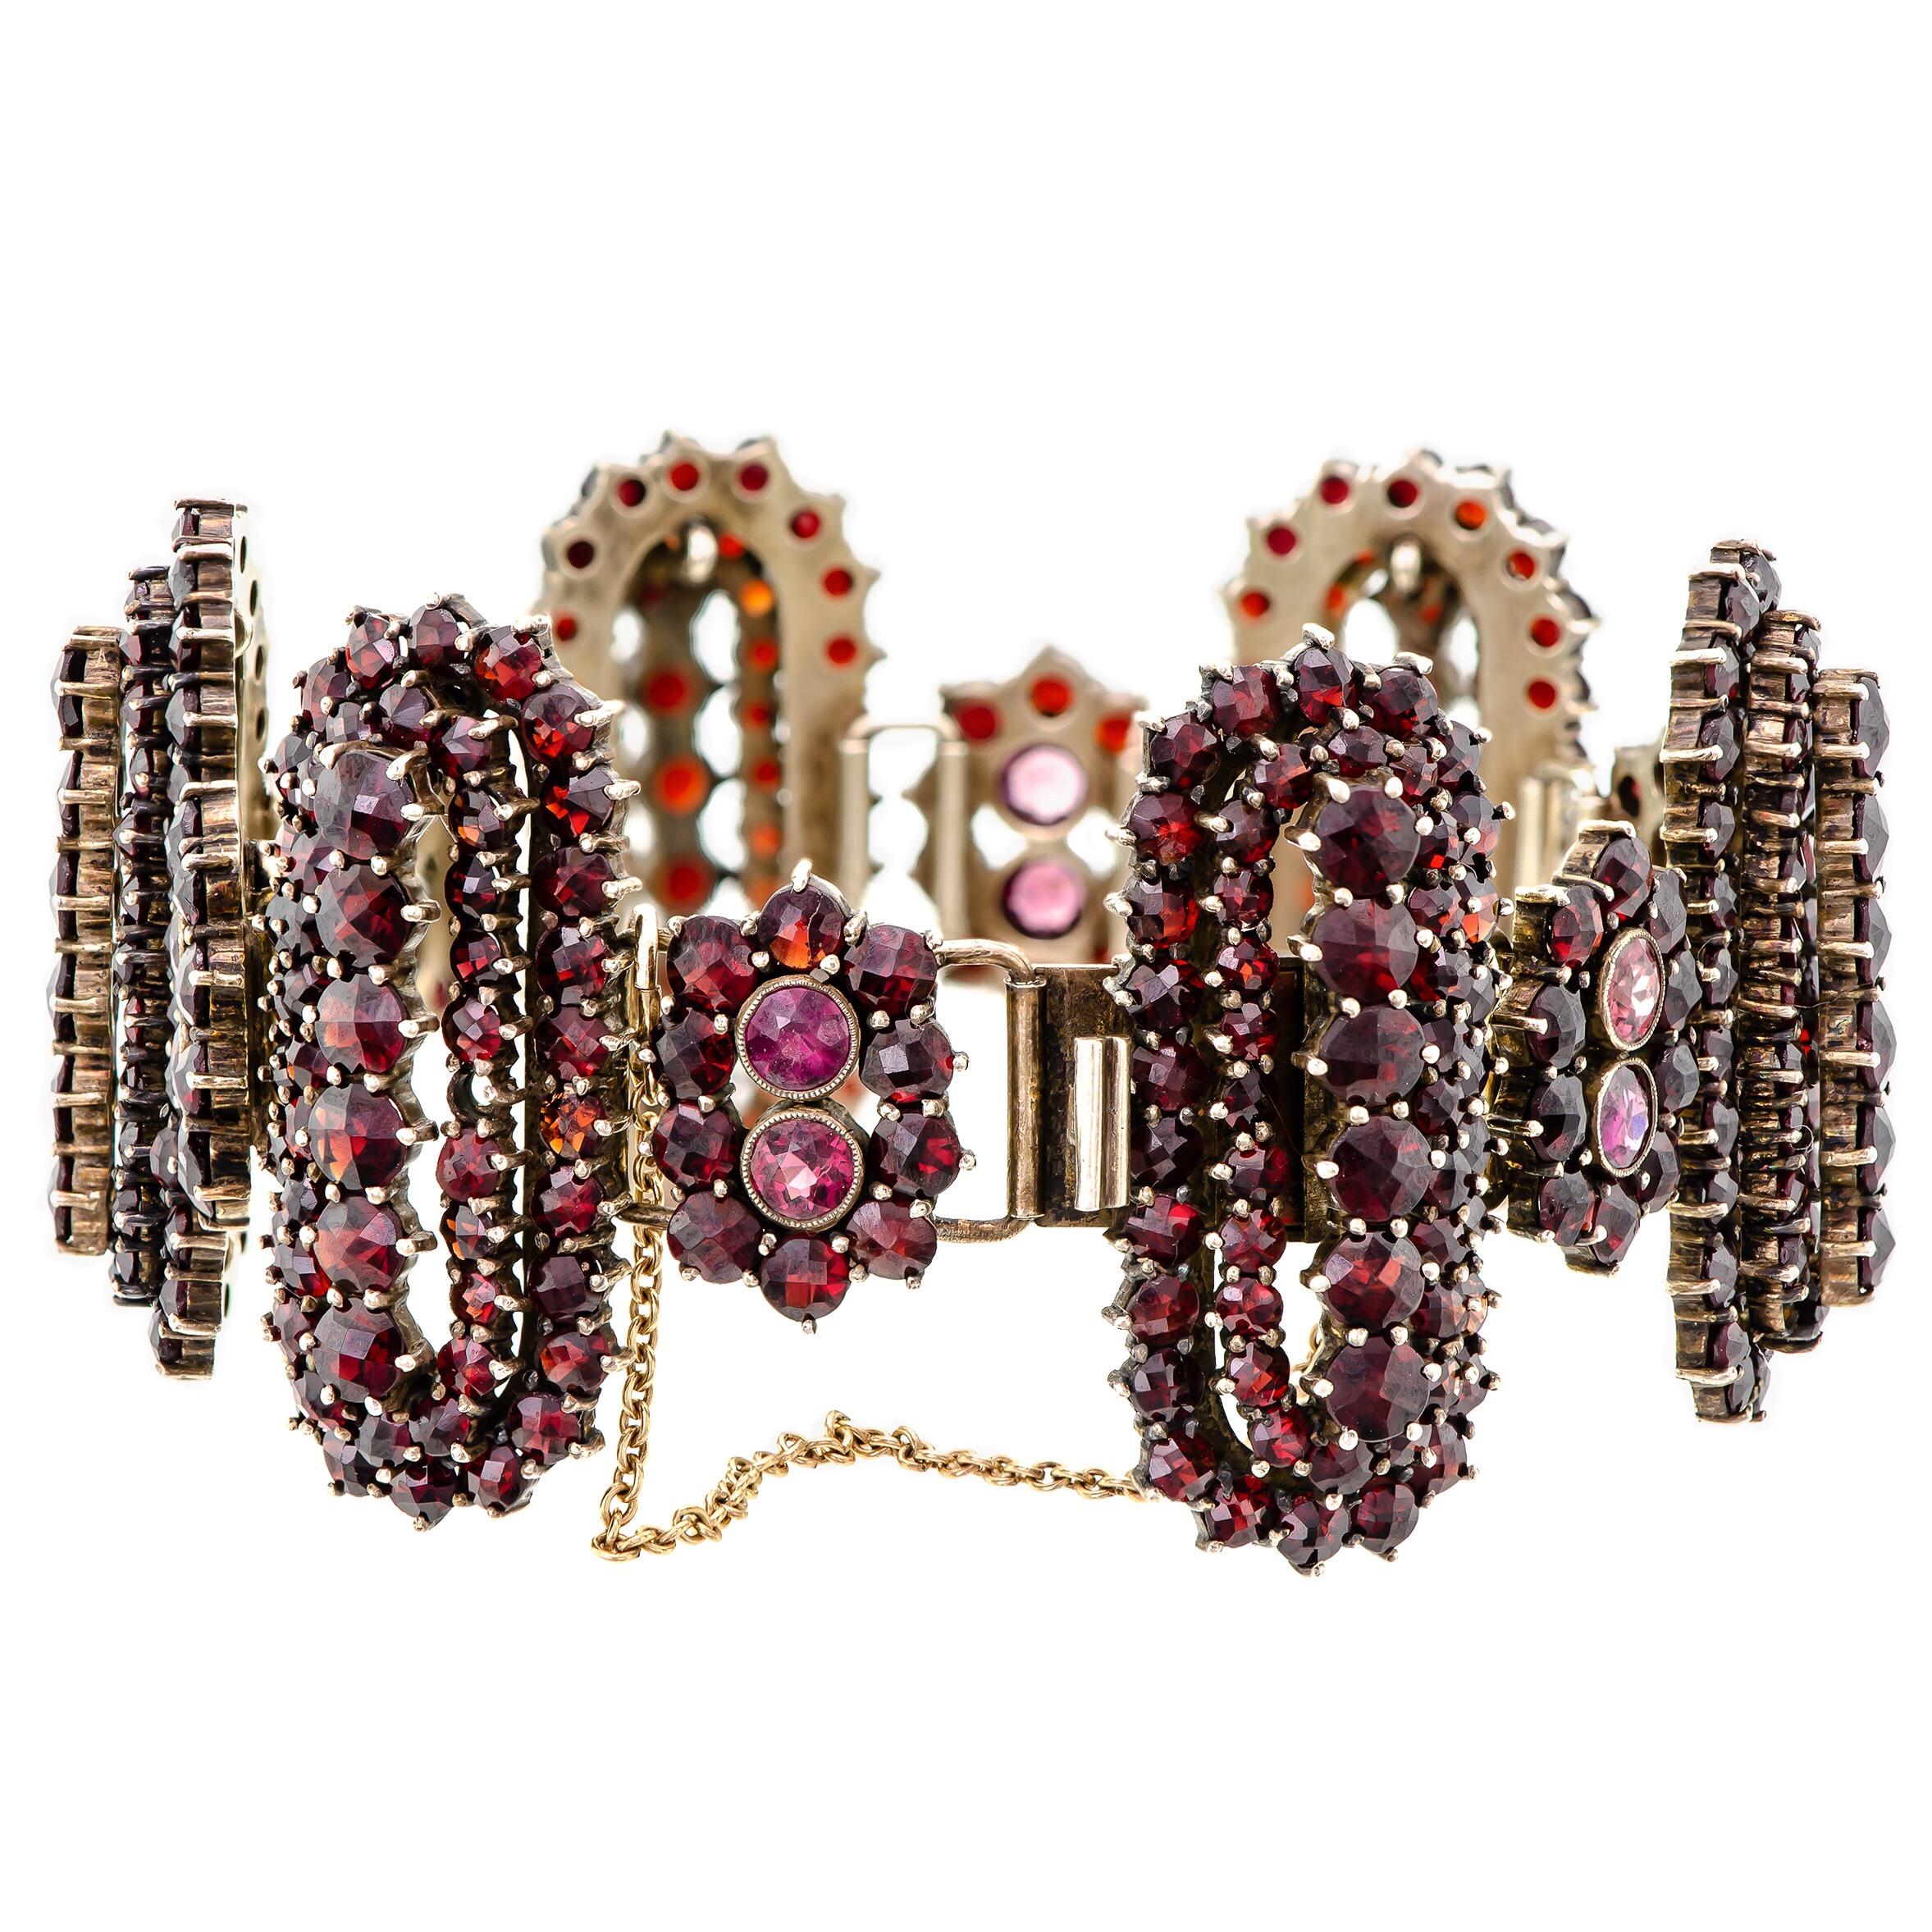 Outstanding Vintage Garnet and Gilt Hinged Wide Flexible Bracelet In Excellent Condition For Sale In Lombard, IL